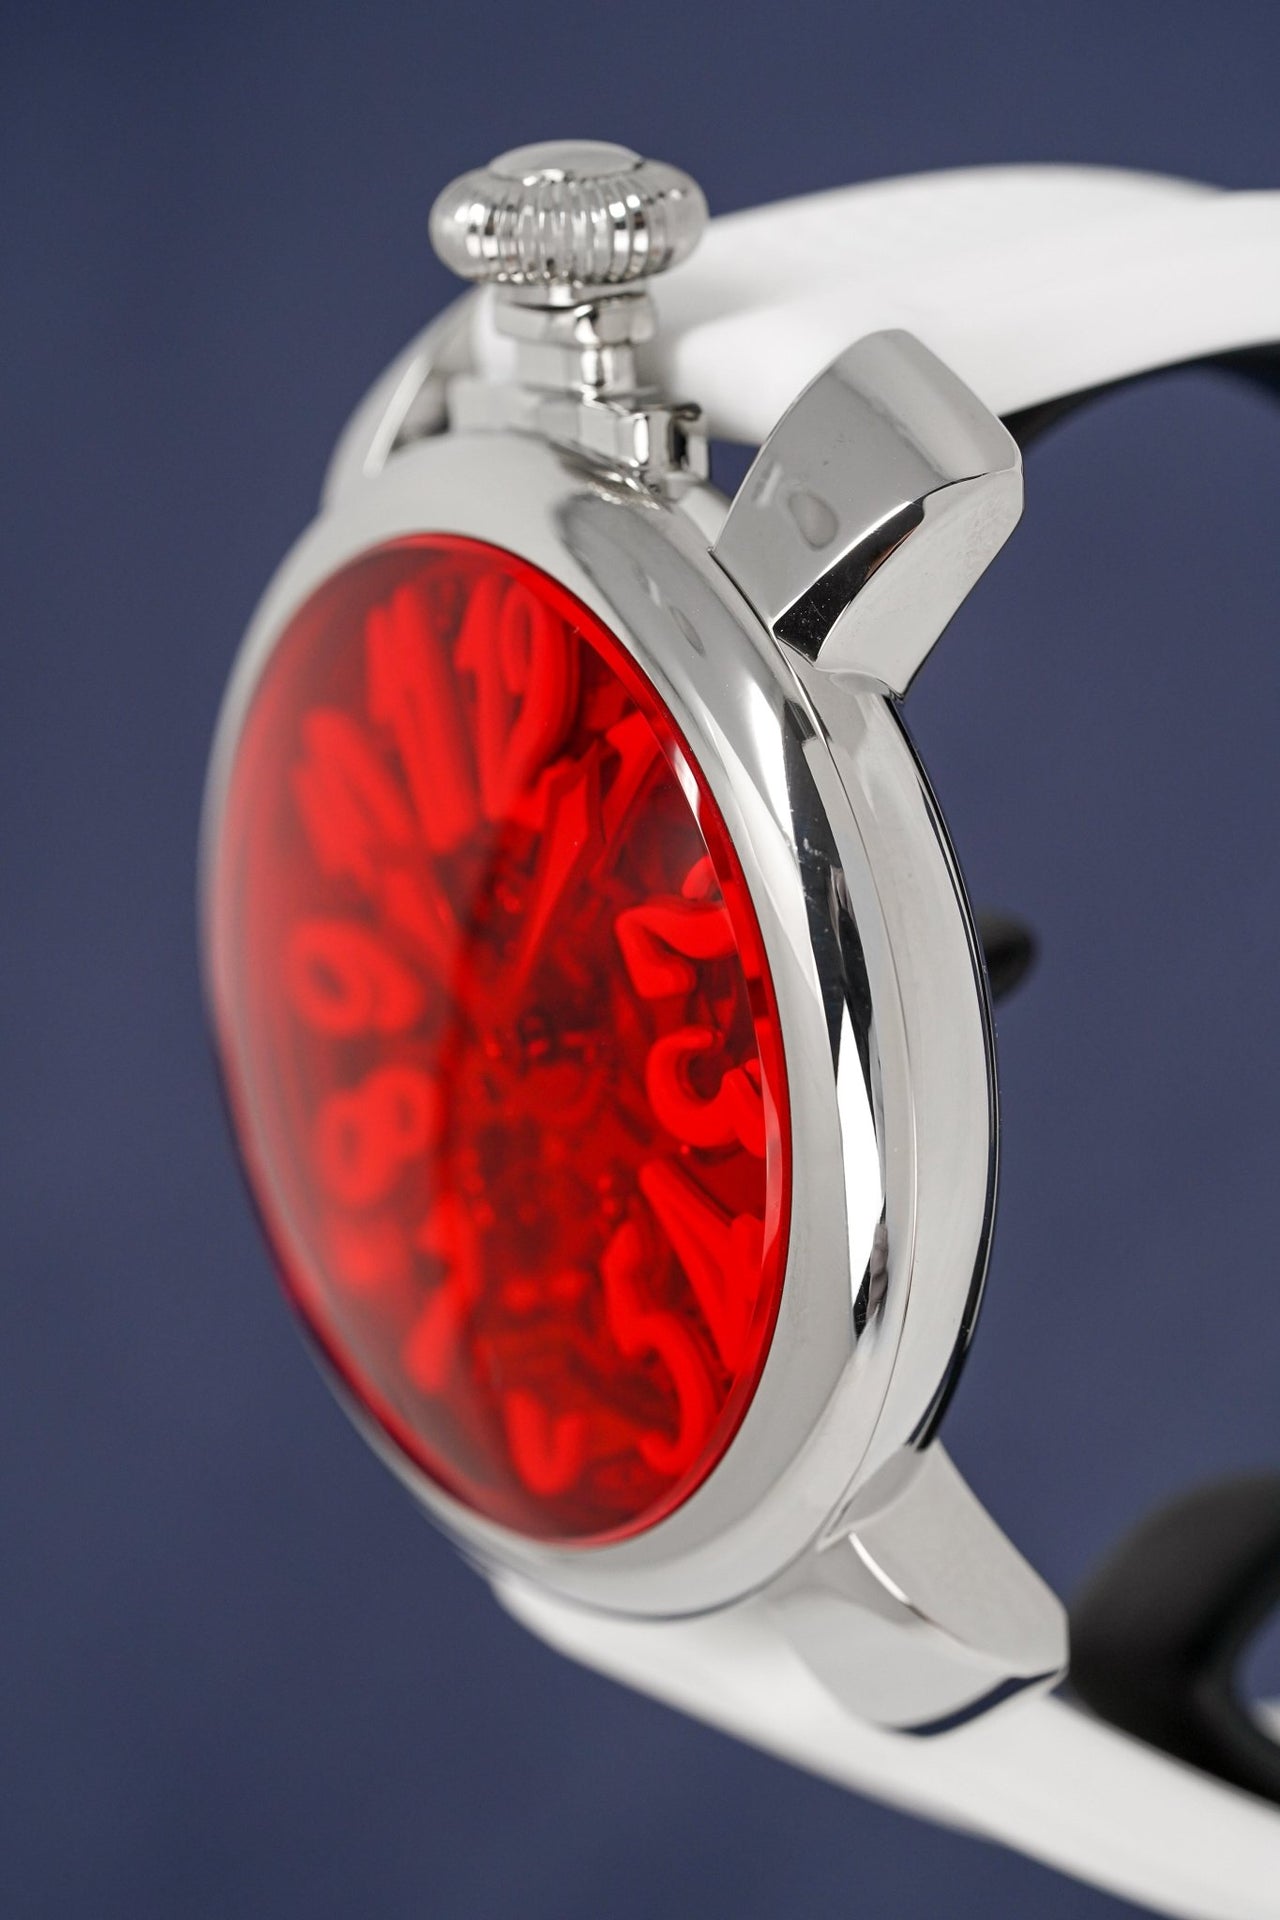 GaGà Milano Skeleton 48MM Red White 5310.01.RED - Watches & Crystals